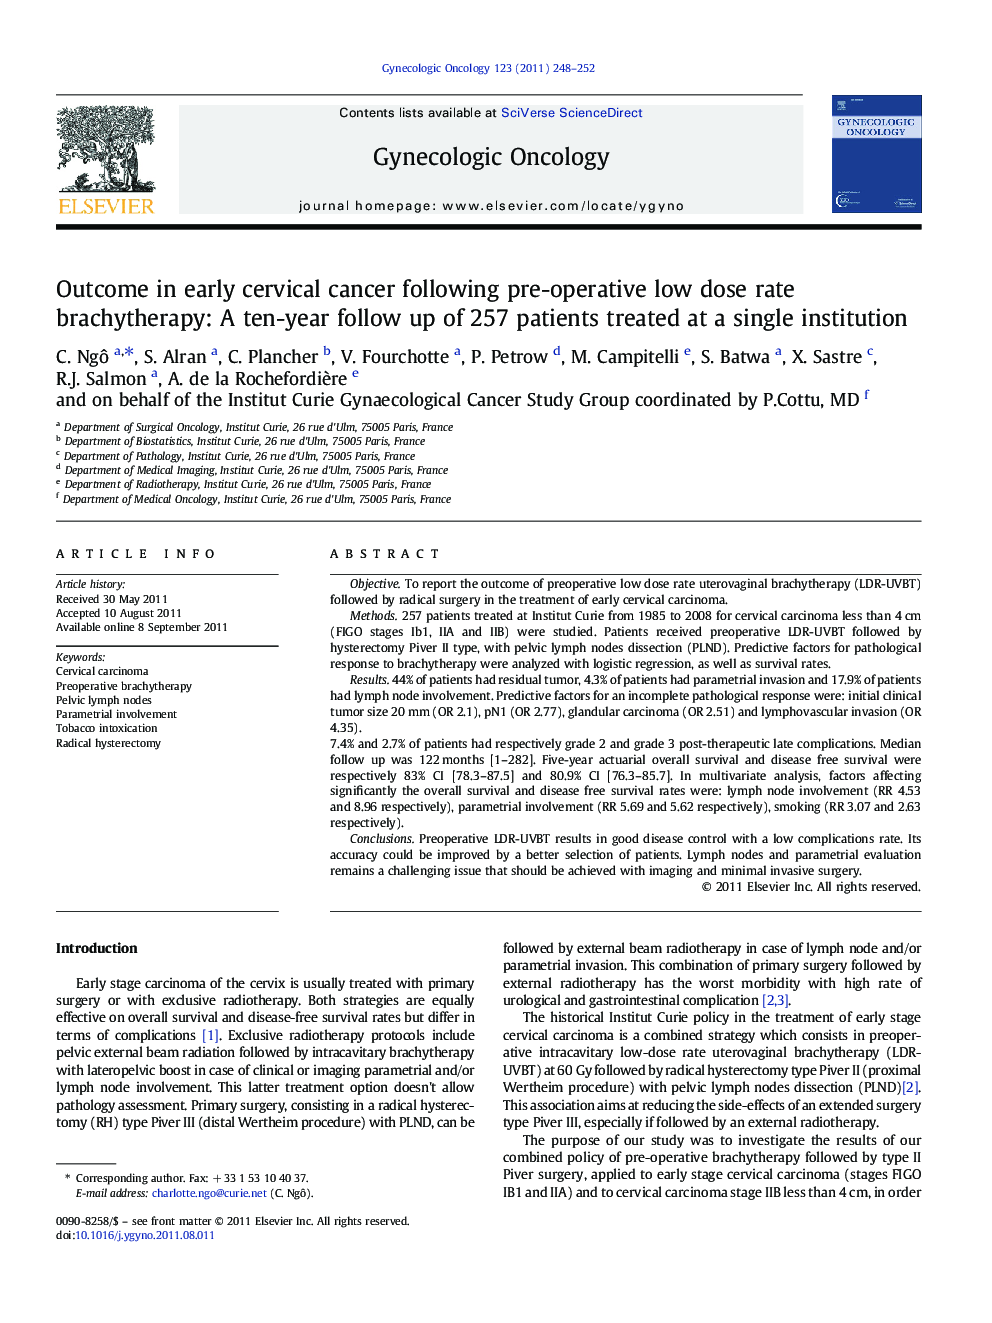 Outcome in early cervical cancer following pre-operative low dose rate brachytherapy: A ten-year follow up of 257 patients treated at a single institution